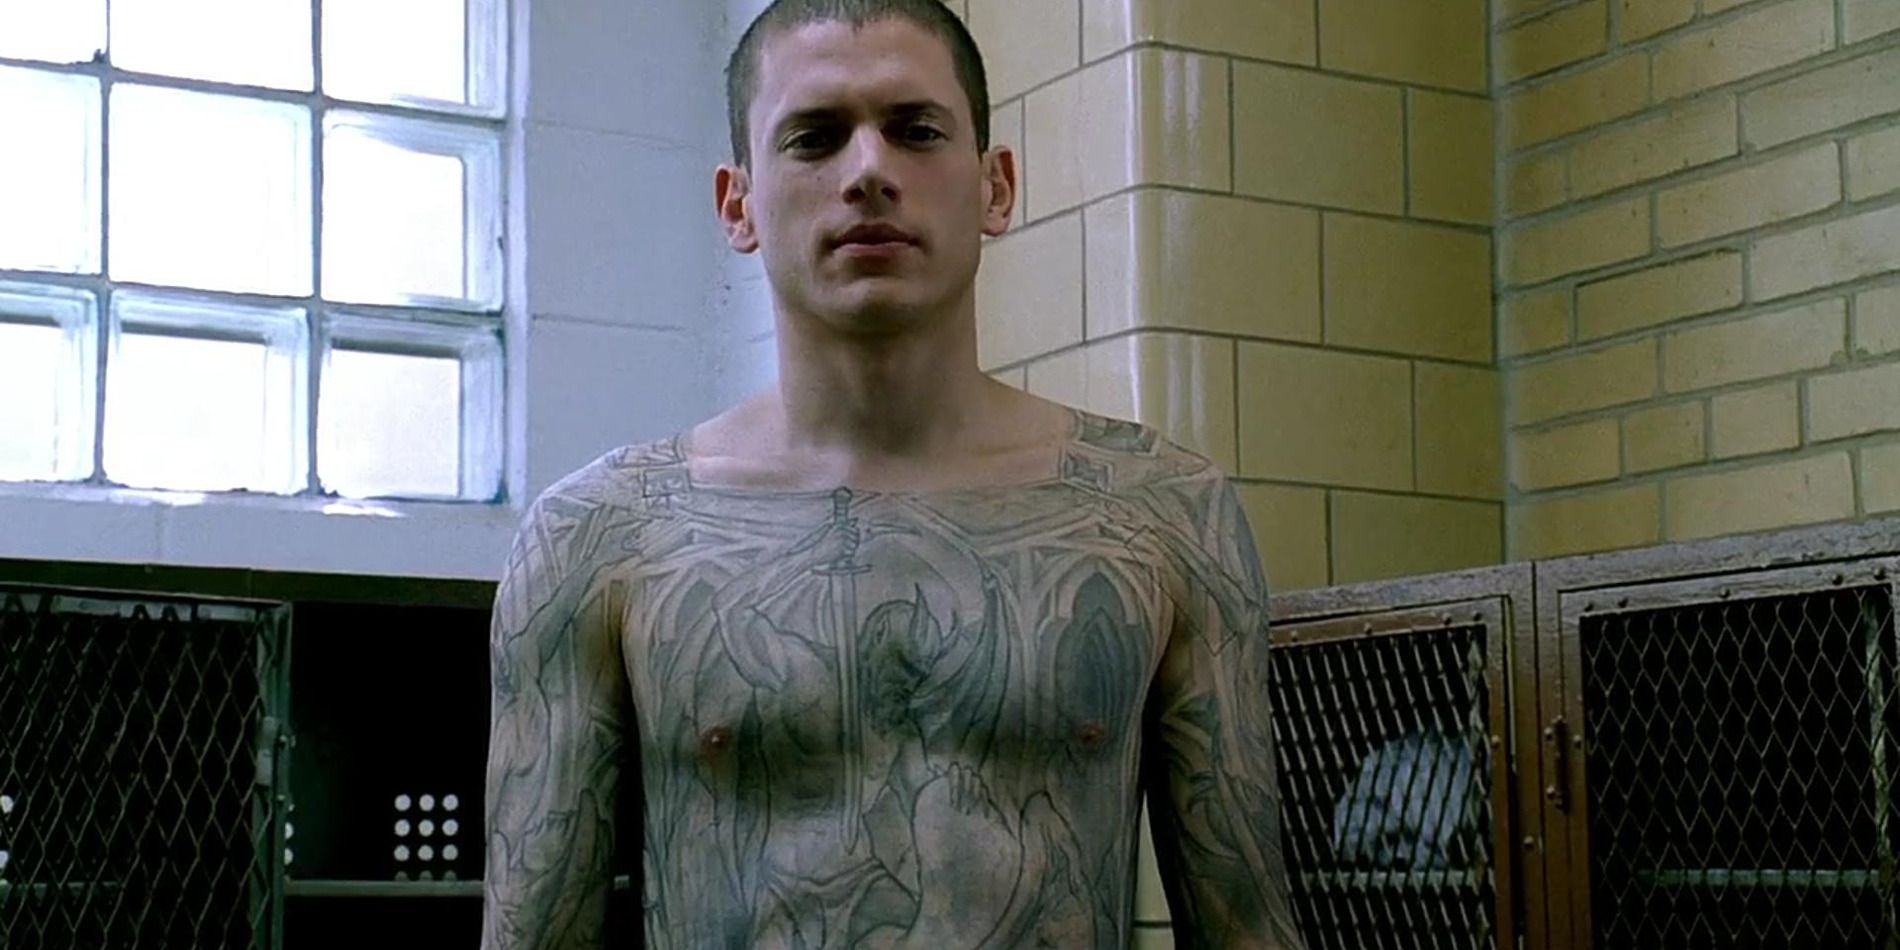 Michael Scofield showing his tattoos in prison